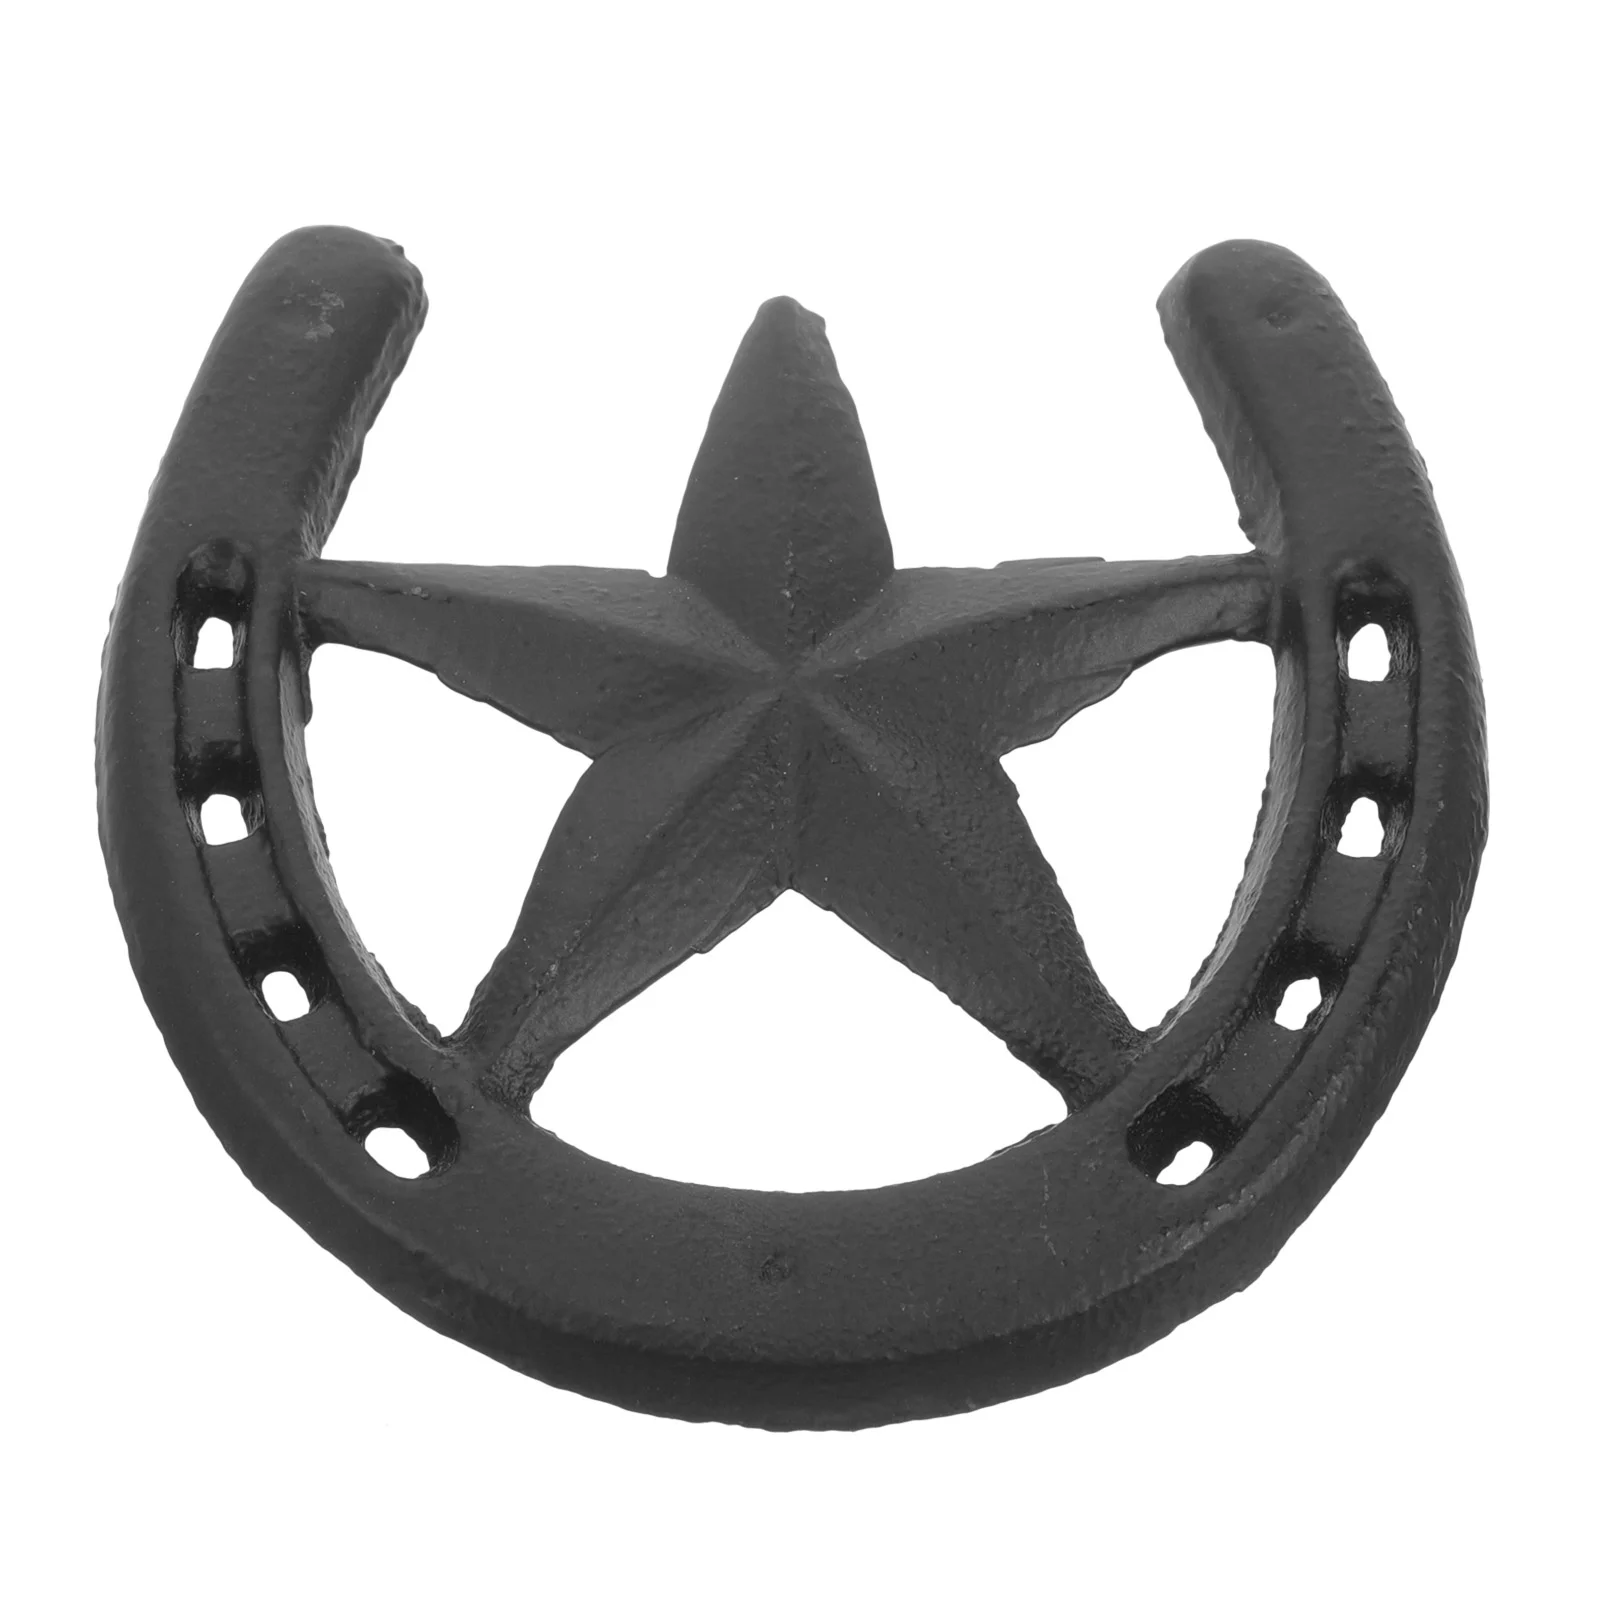 

An Fittings Horseshoe Wall Decor Crafts Metal Hanging Cast Iron Decors Decorative Statue